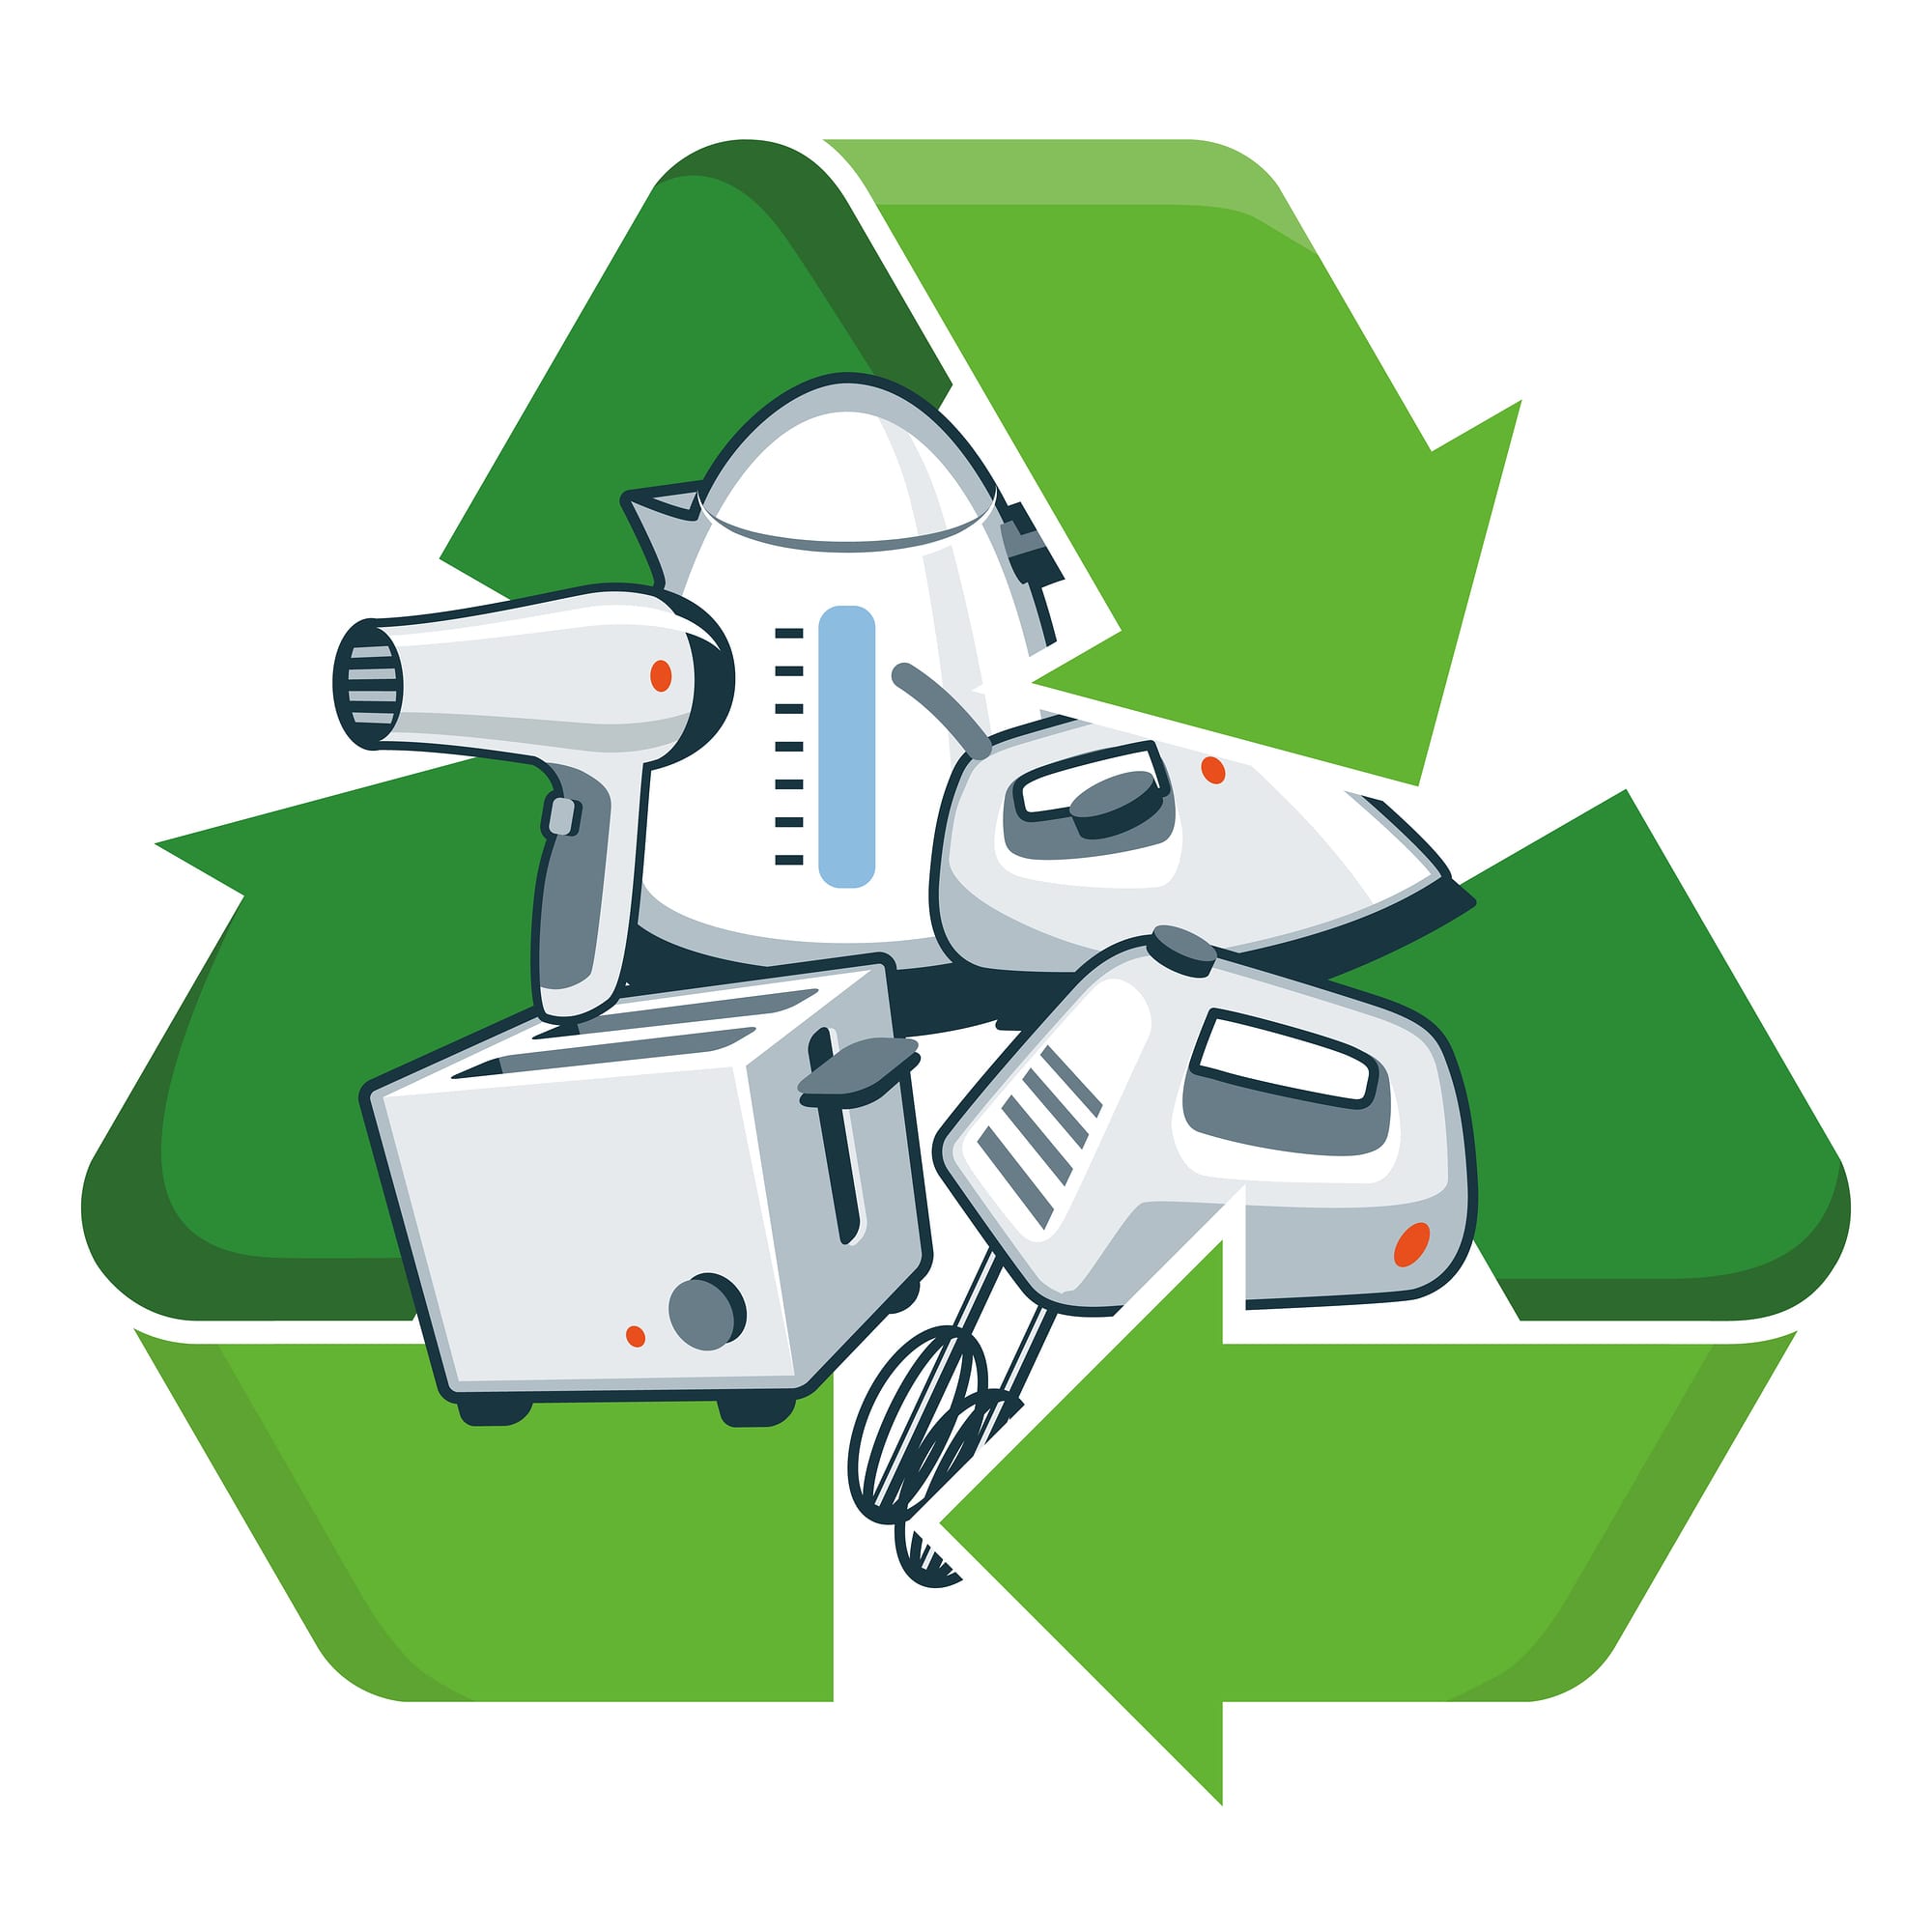 where to recycle electronics